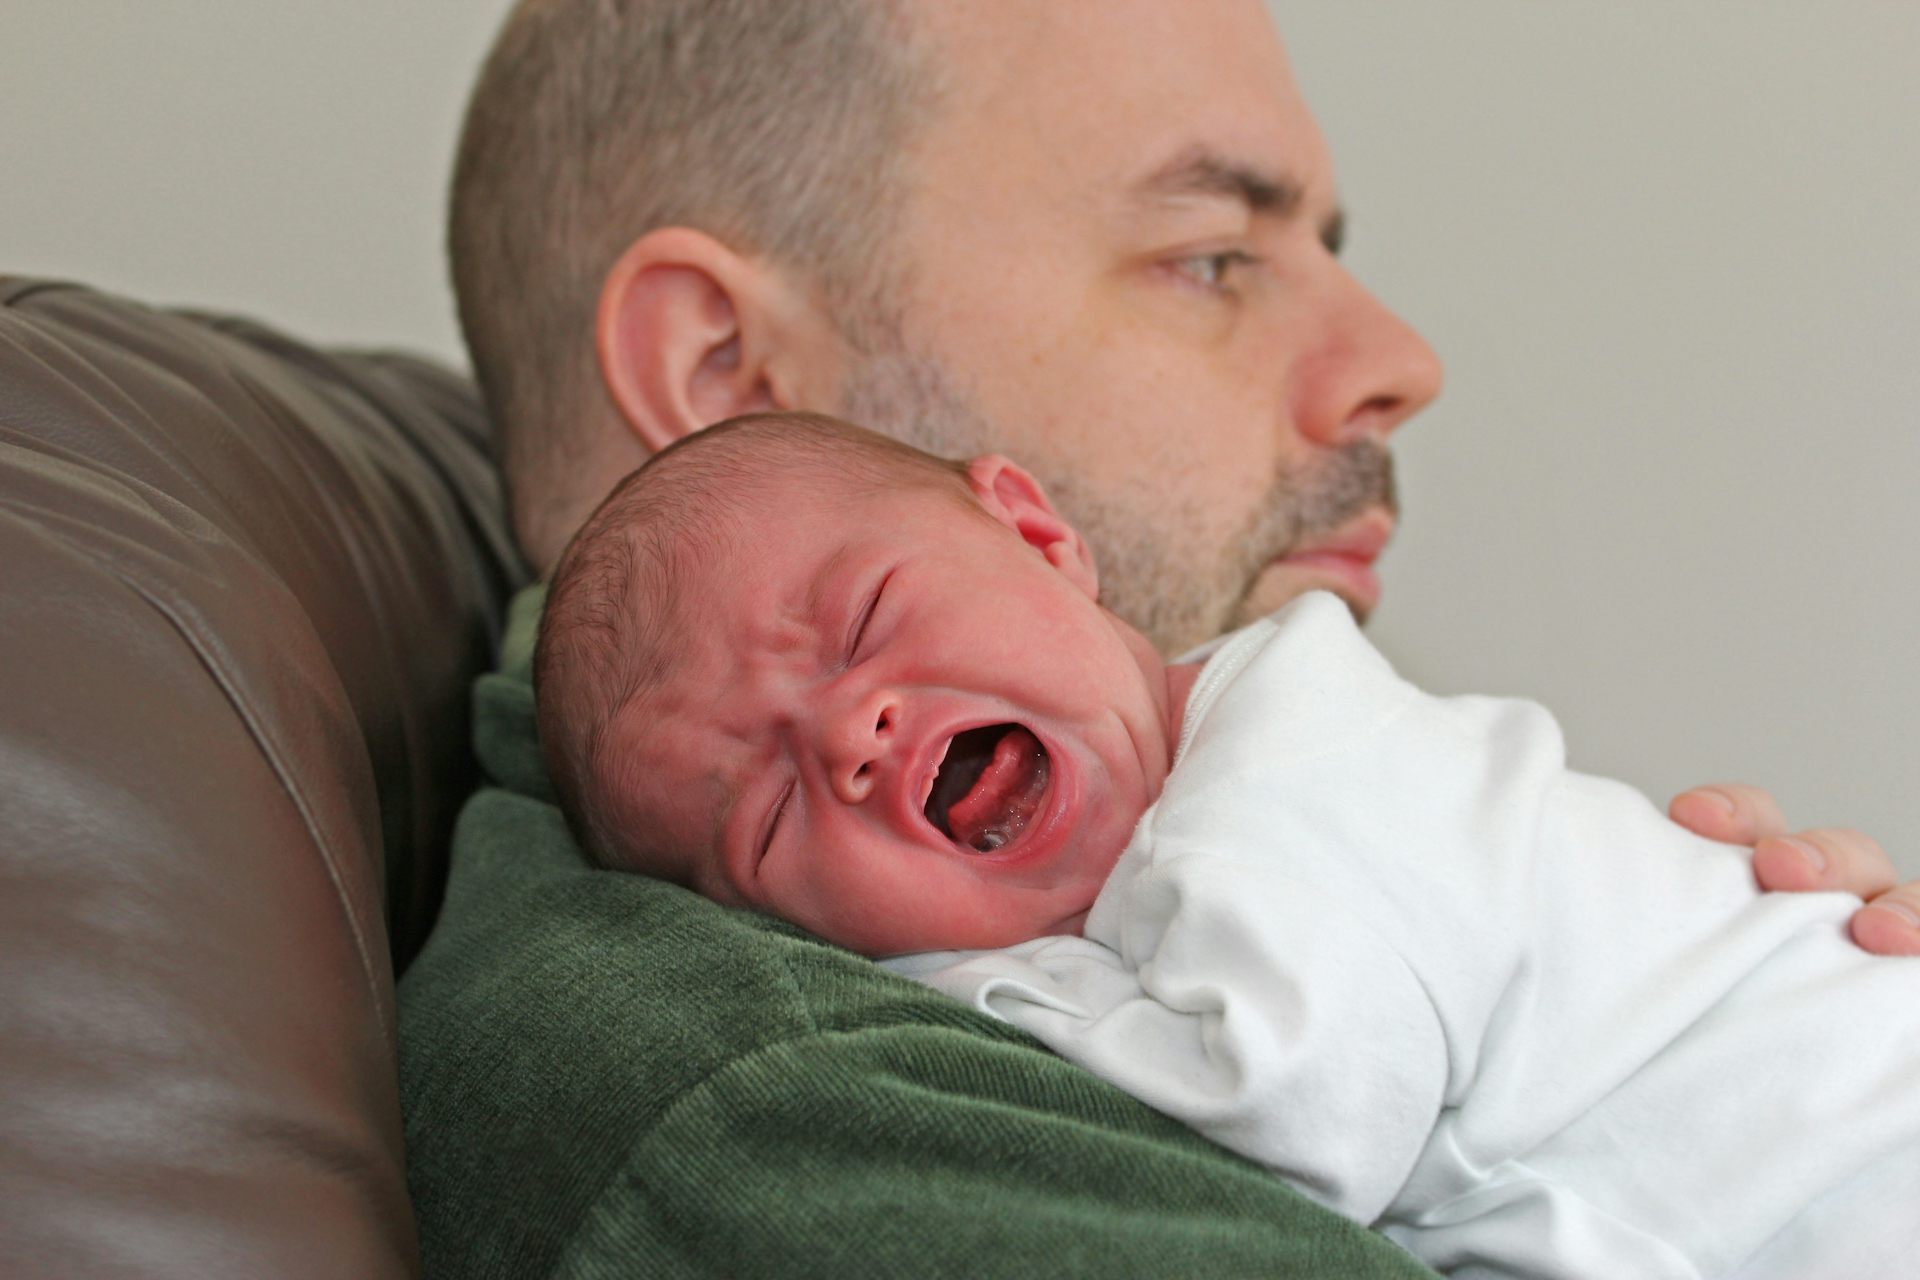 evening colic in infants